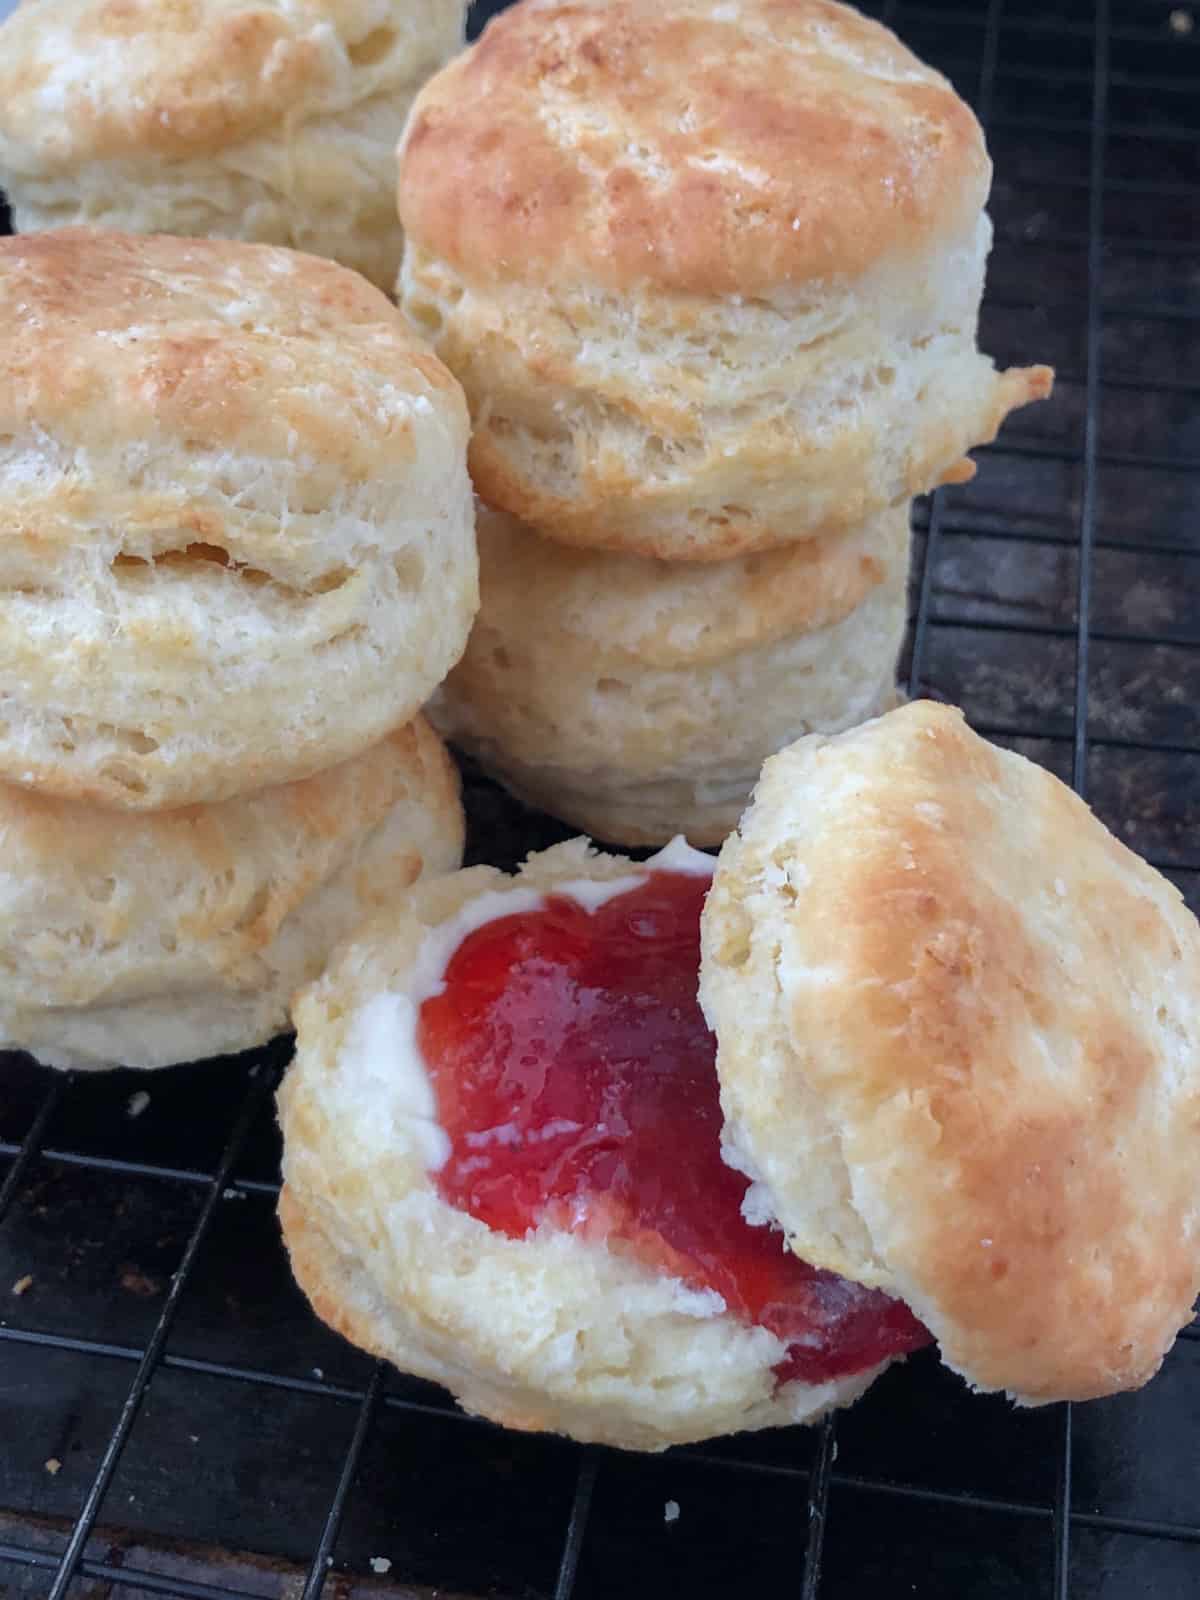 Stack of biscuits on cooling rack with one slather in strawberry jam.